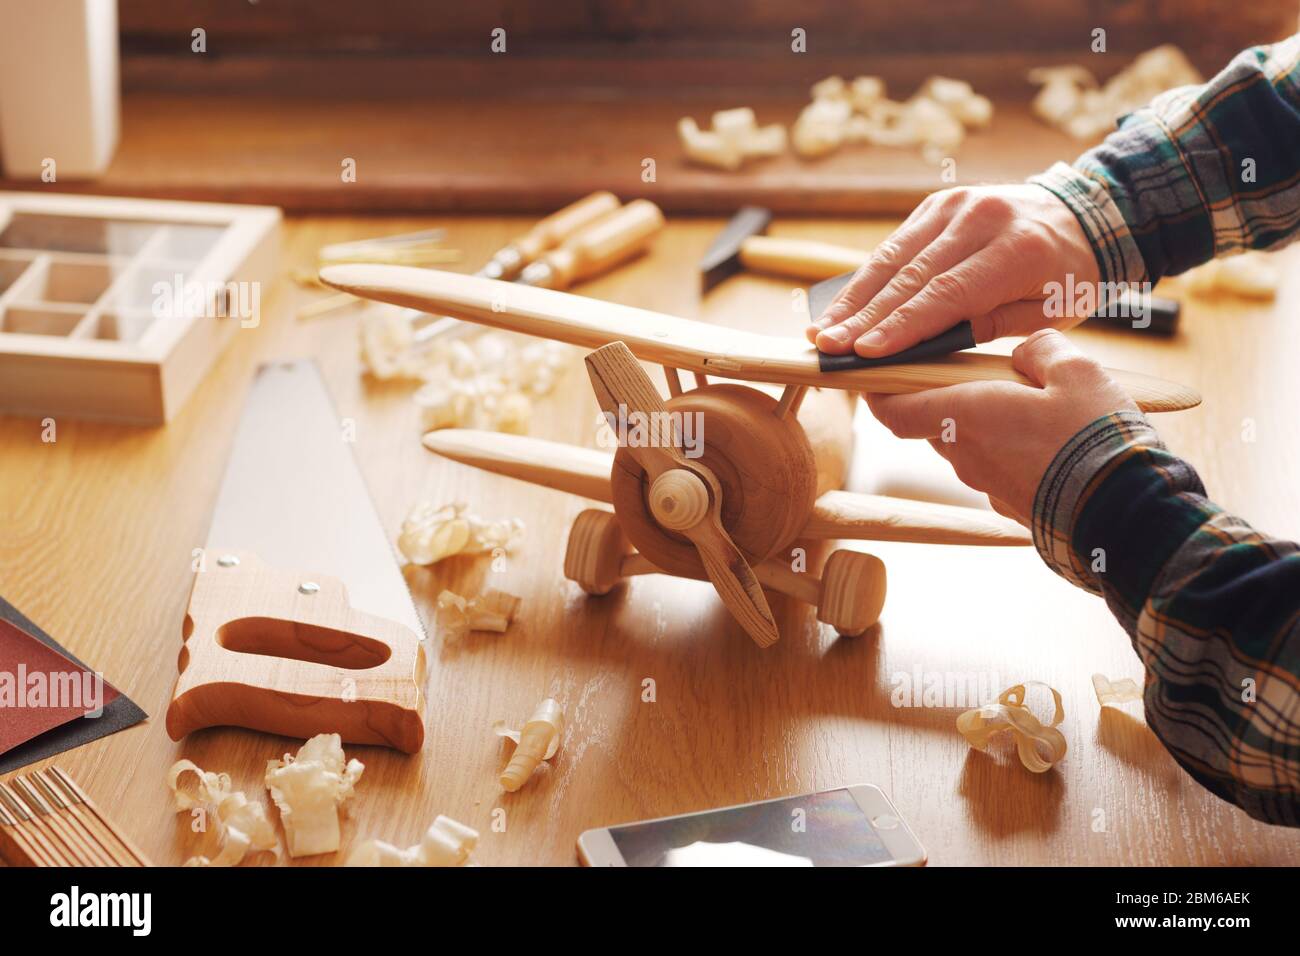 Craftsman smoothing a wooden toy surface with sandpaper, tools and wood shavings all around, hands close up Stock Photo